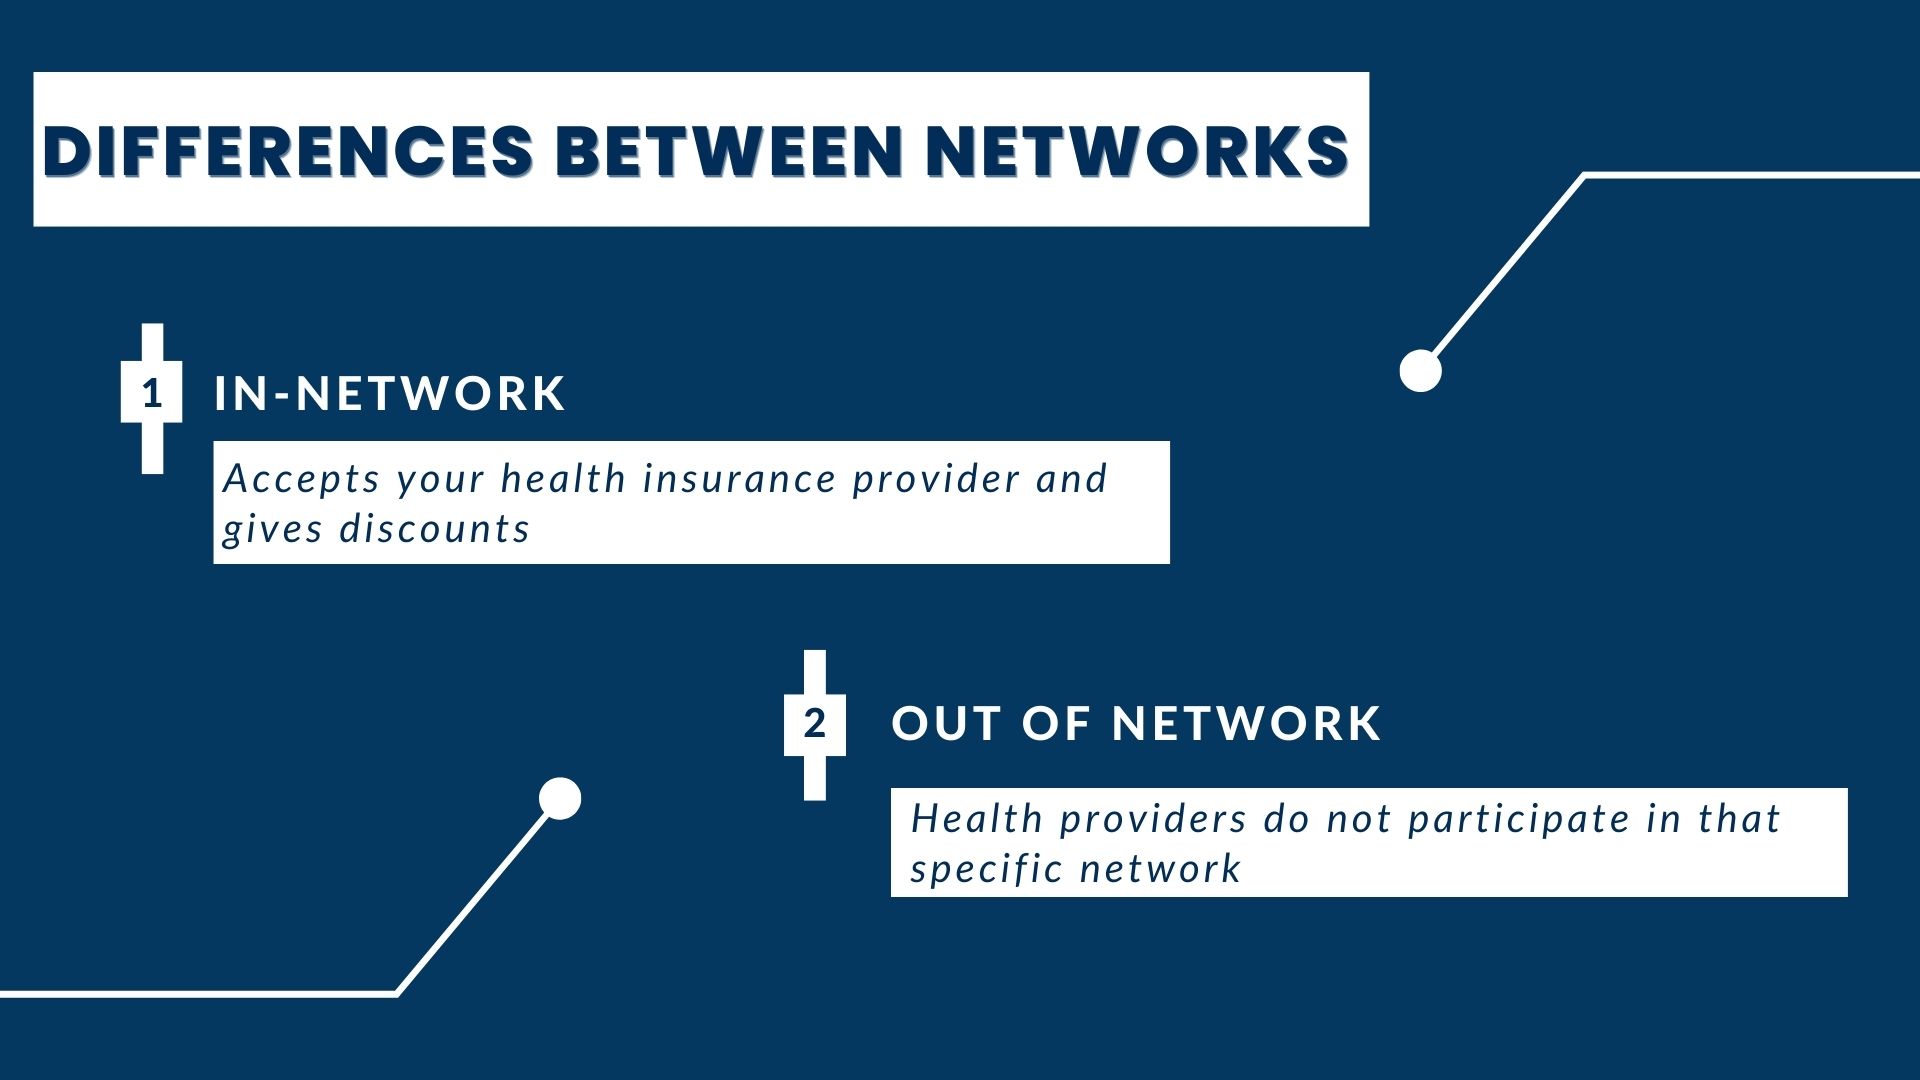 Differences Between Networks